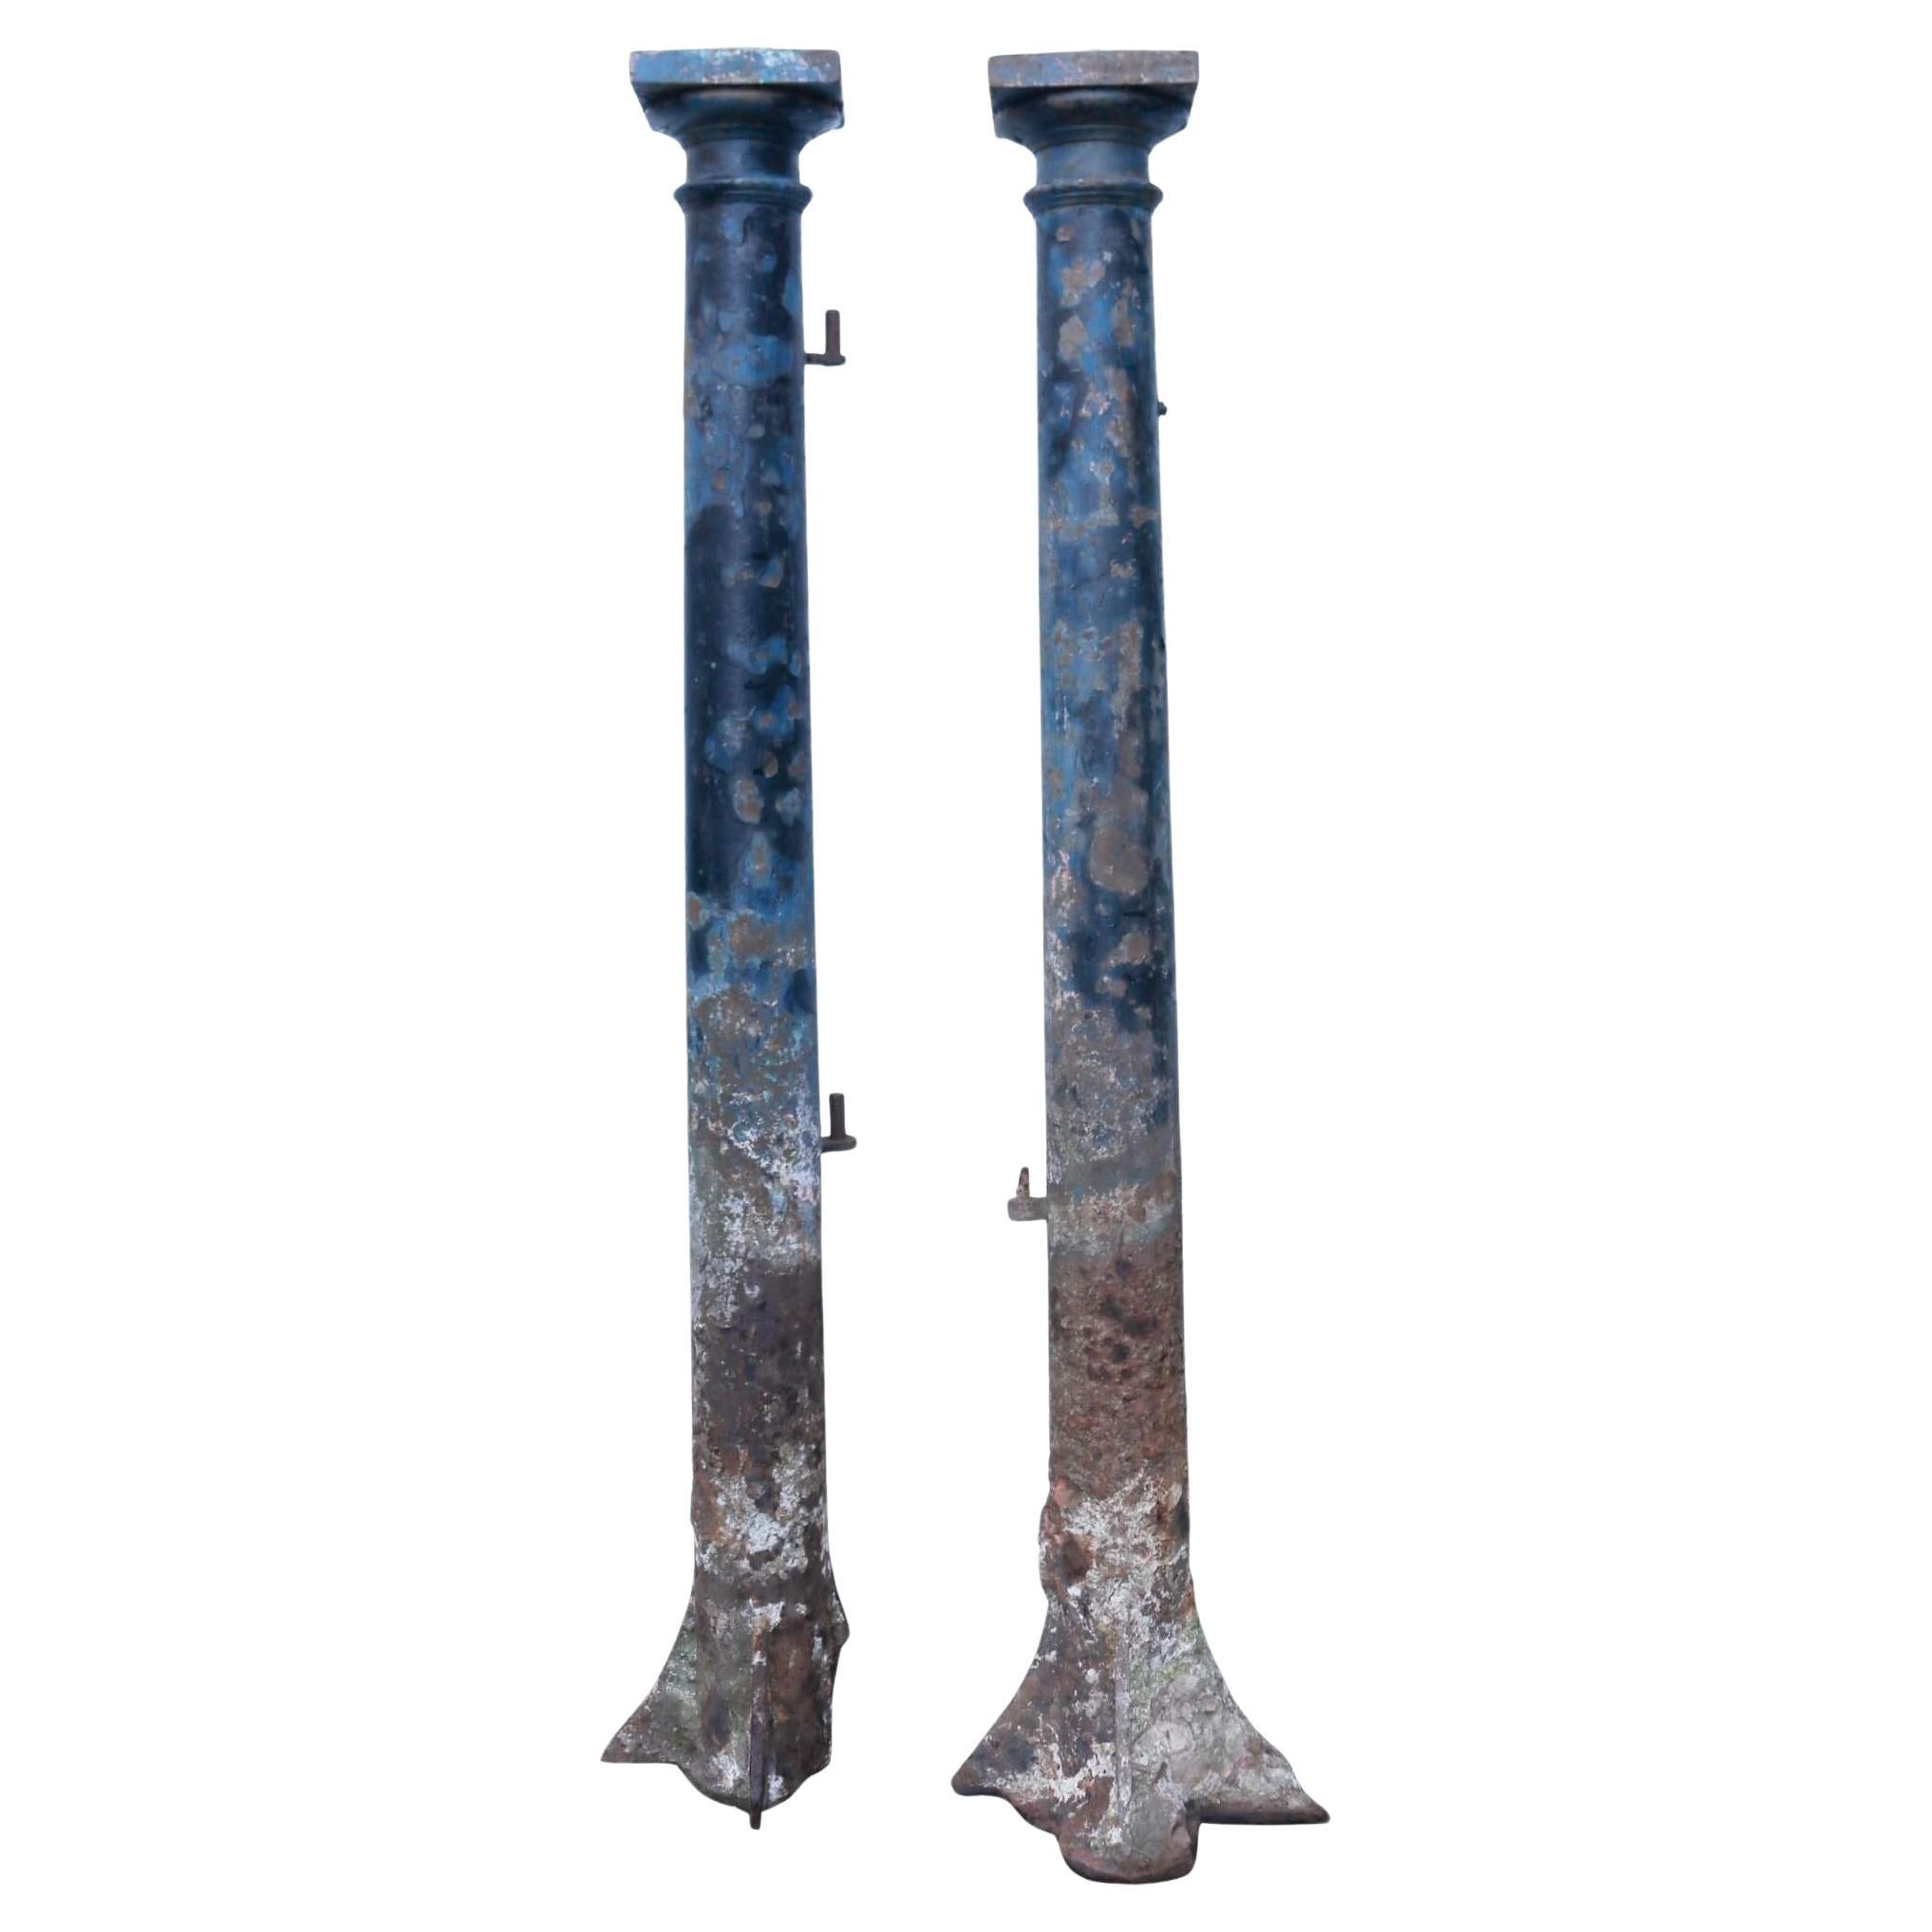 Antique Pair of Reclaimed Iron Gate Posts